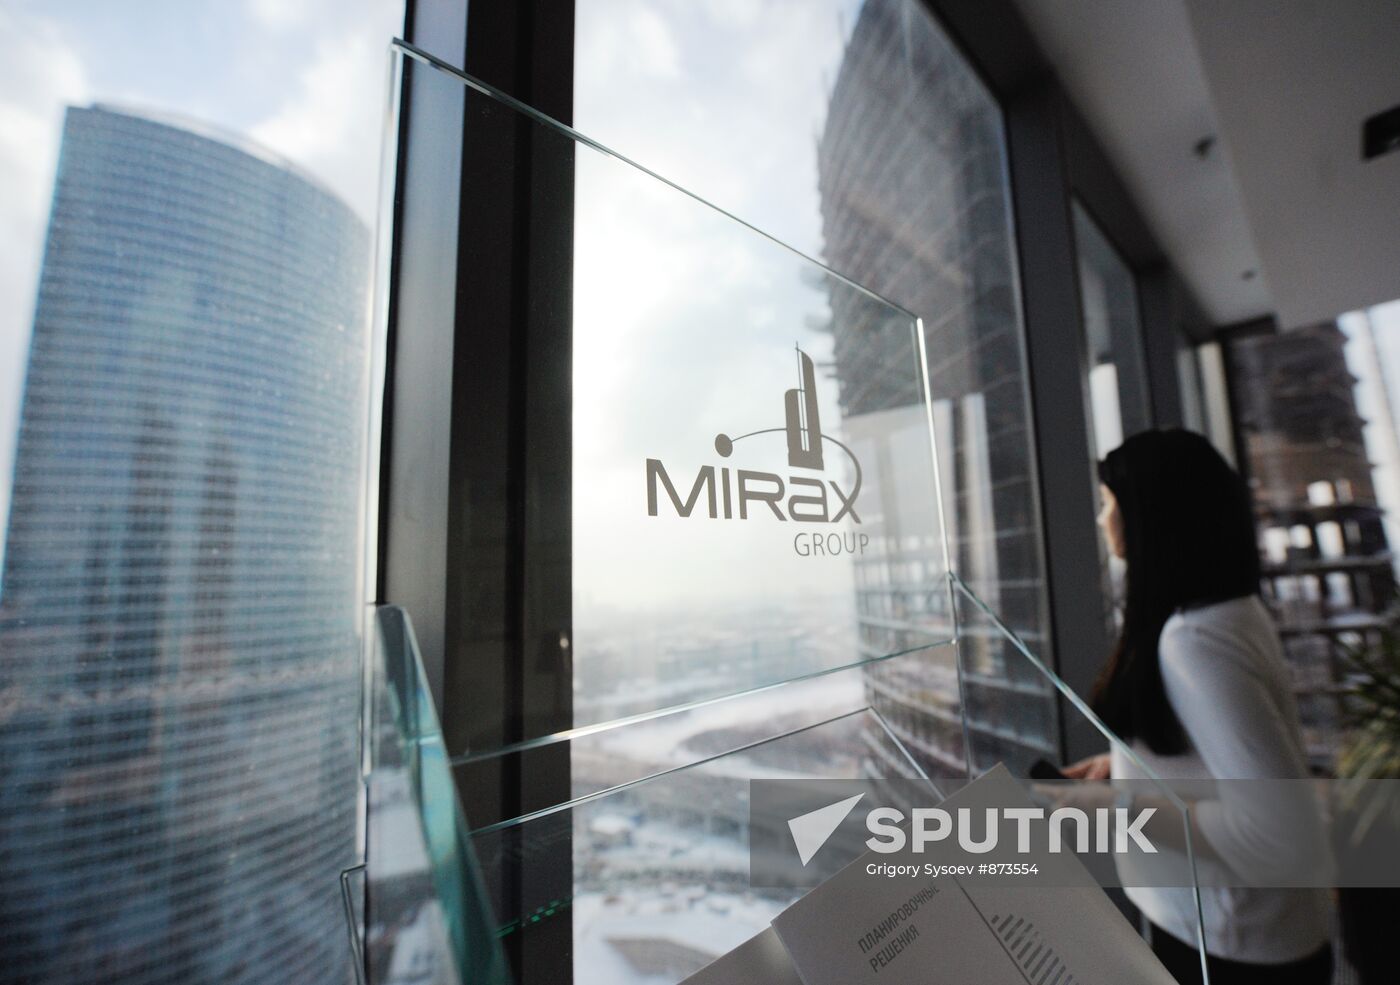 Offices of the Mirax Group